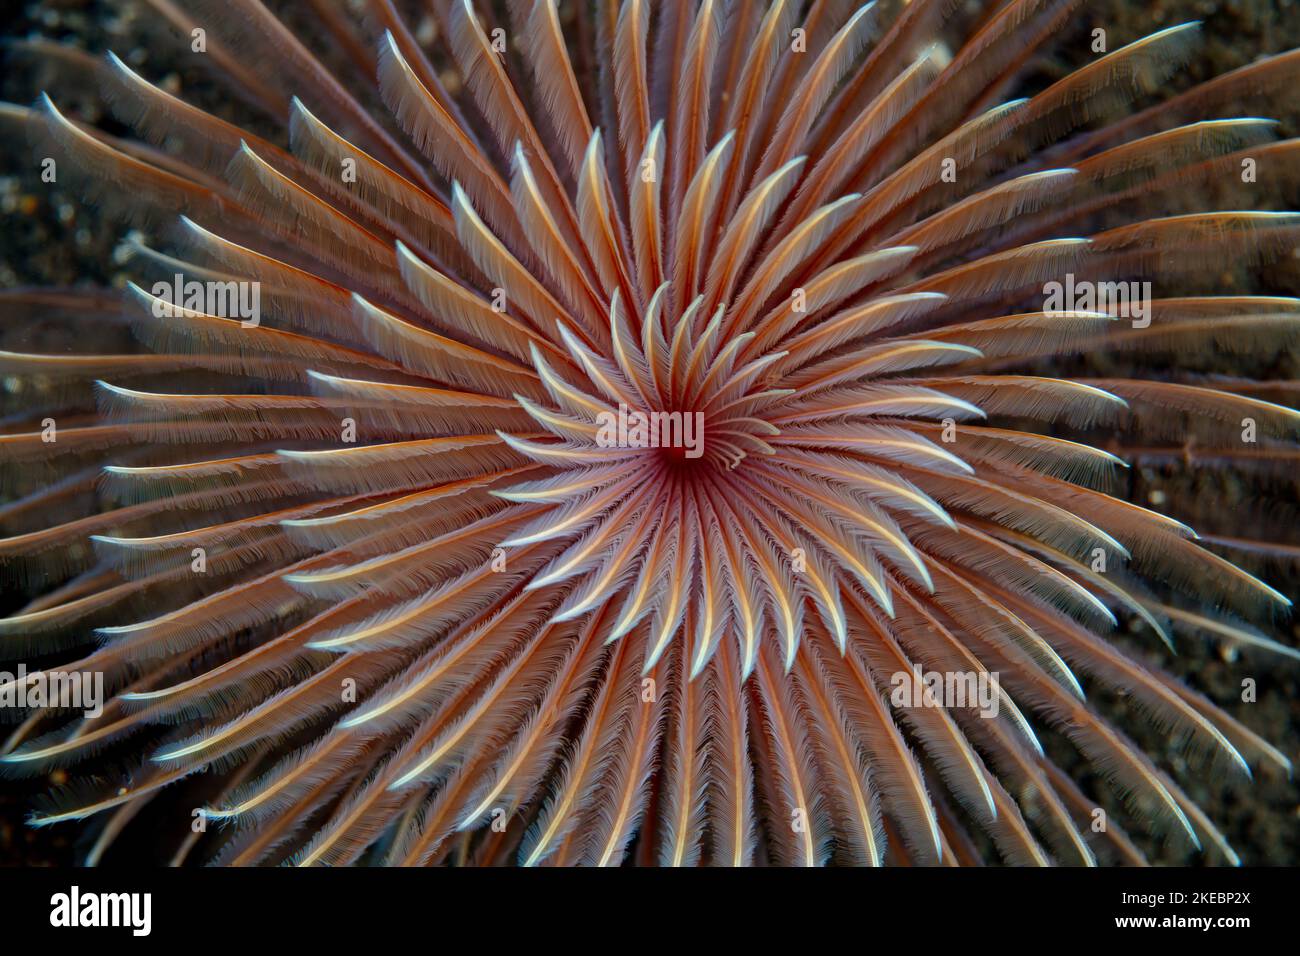 A Feather duster worm, Bispira sp., has a spiraled gill crown that extends from its tube embedded in sand near a reef in Indonesia. Stock Photo